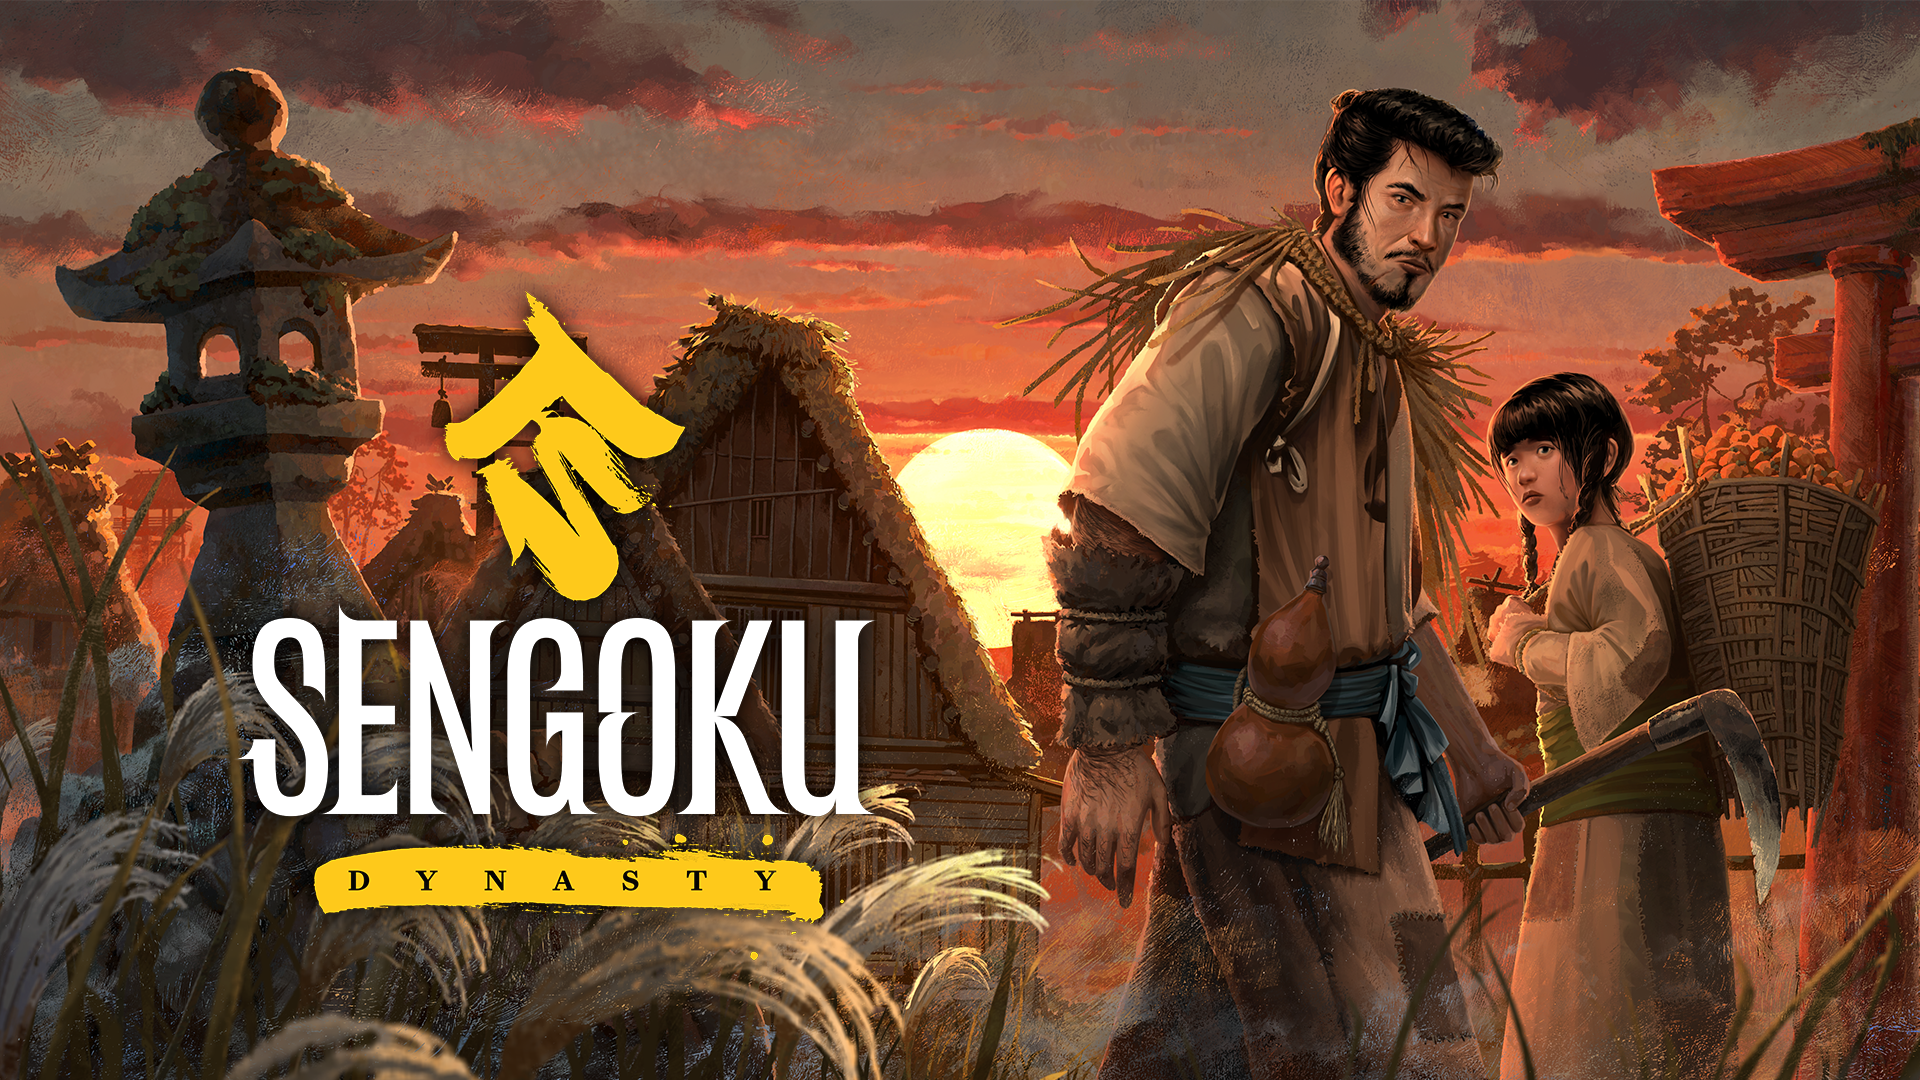 Toplitz Productions on X: The Steam Playtest for Sengoku Dynasty begins  now! First, thank you for your enormous interest in the Steam Playtest! If  you have been selected, you can now enter